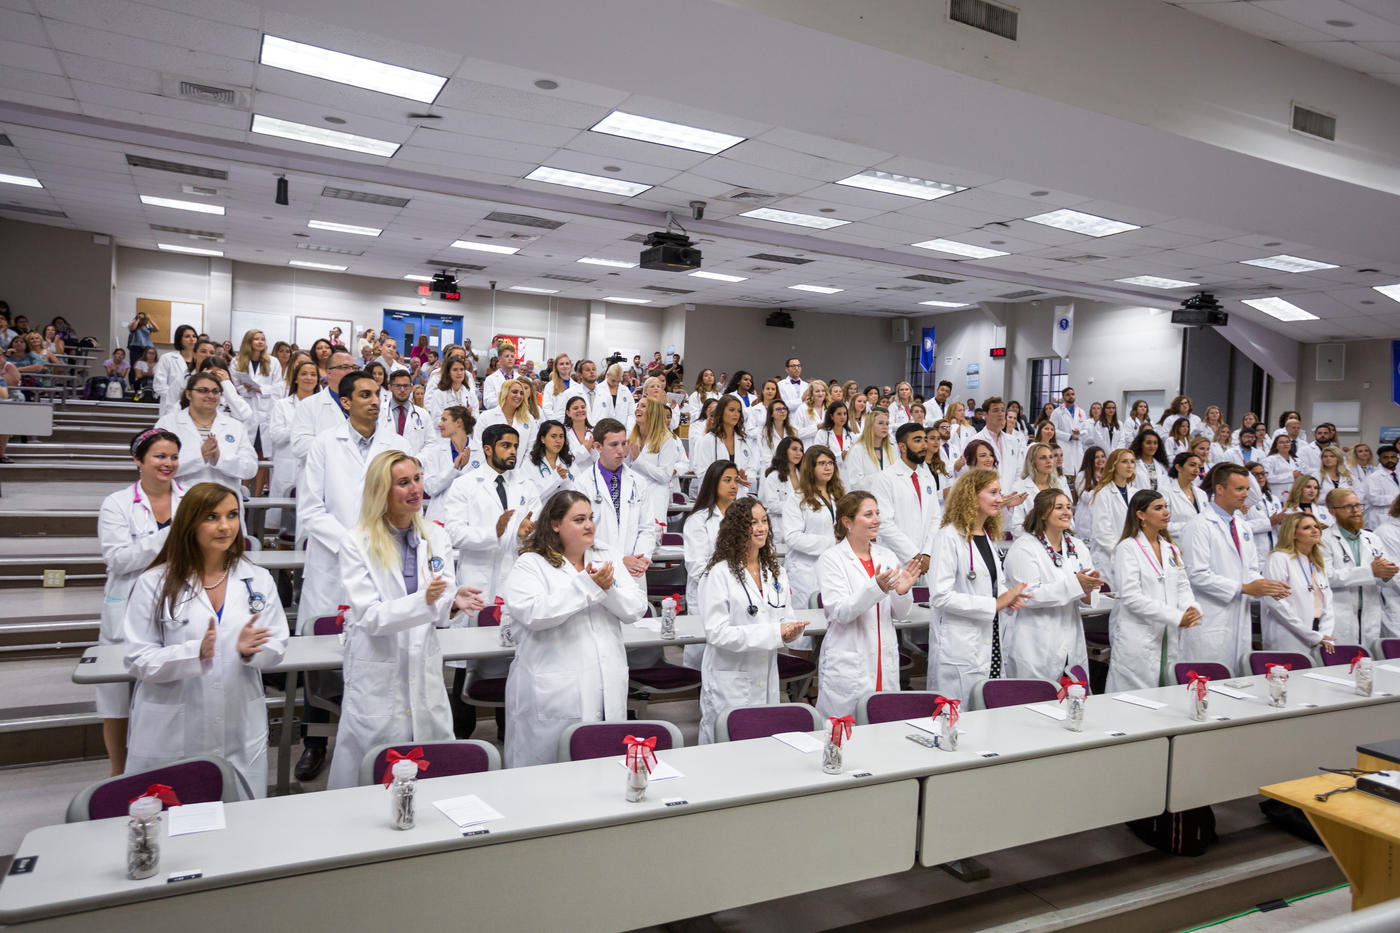 A classroom filled with students in lab coats, standing and applauding